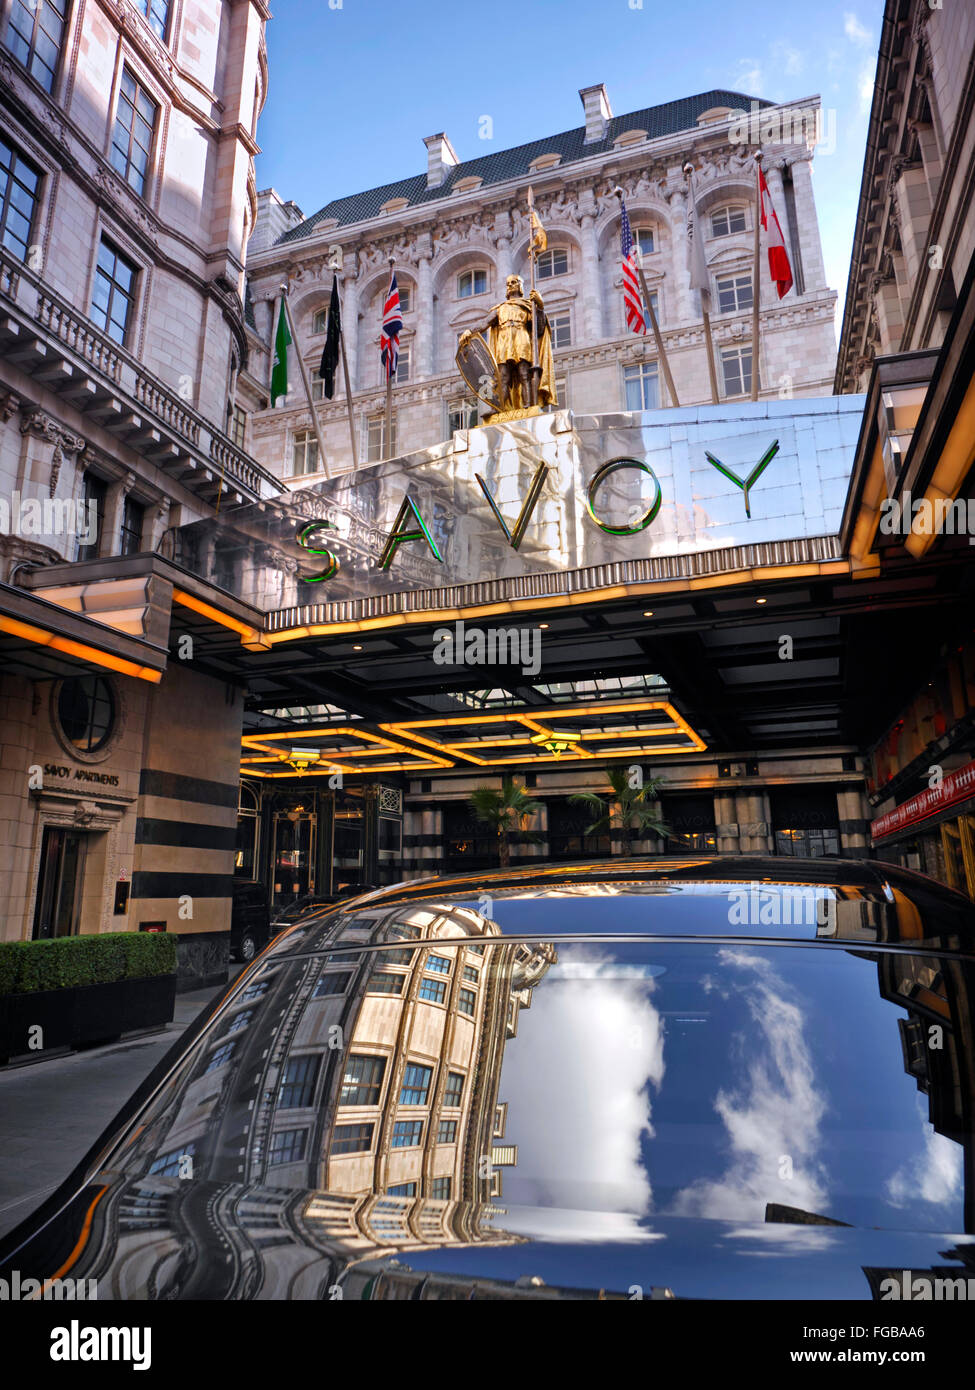 SAVOY HOTEL Exterior view of luxury Five-Star Savoy Hotel entrance foyer with sky reflection in Rolls Royce motorcar The Strand London WC2 Stock Photo